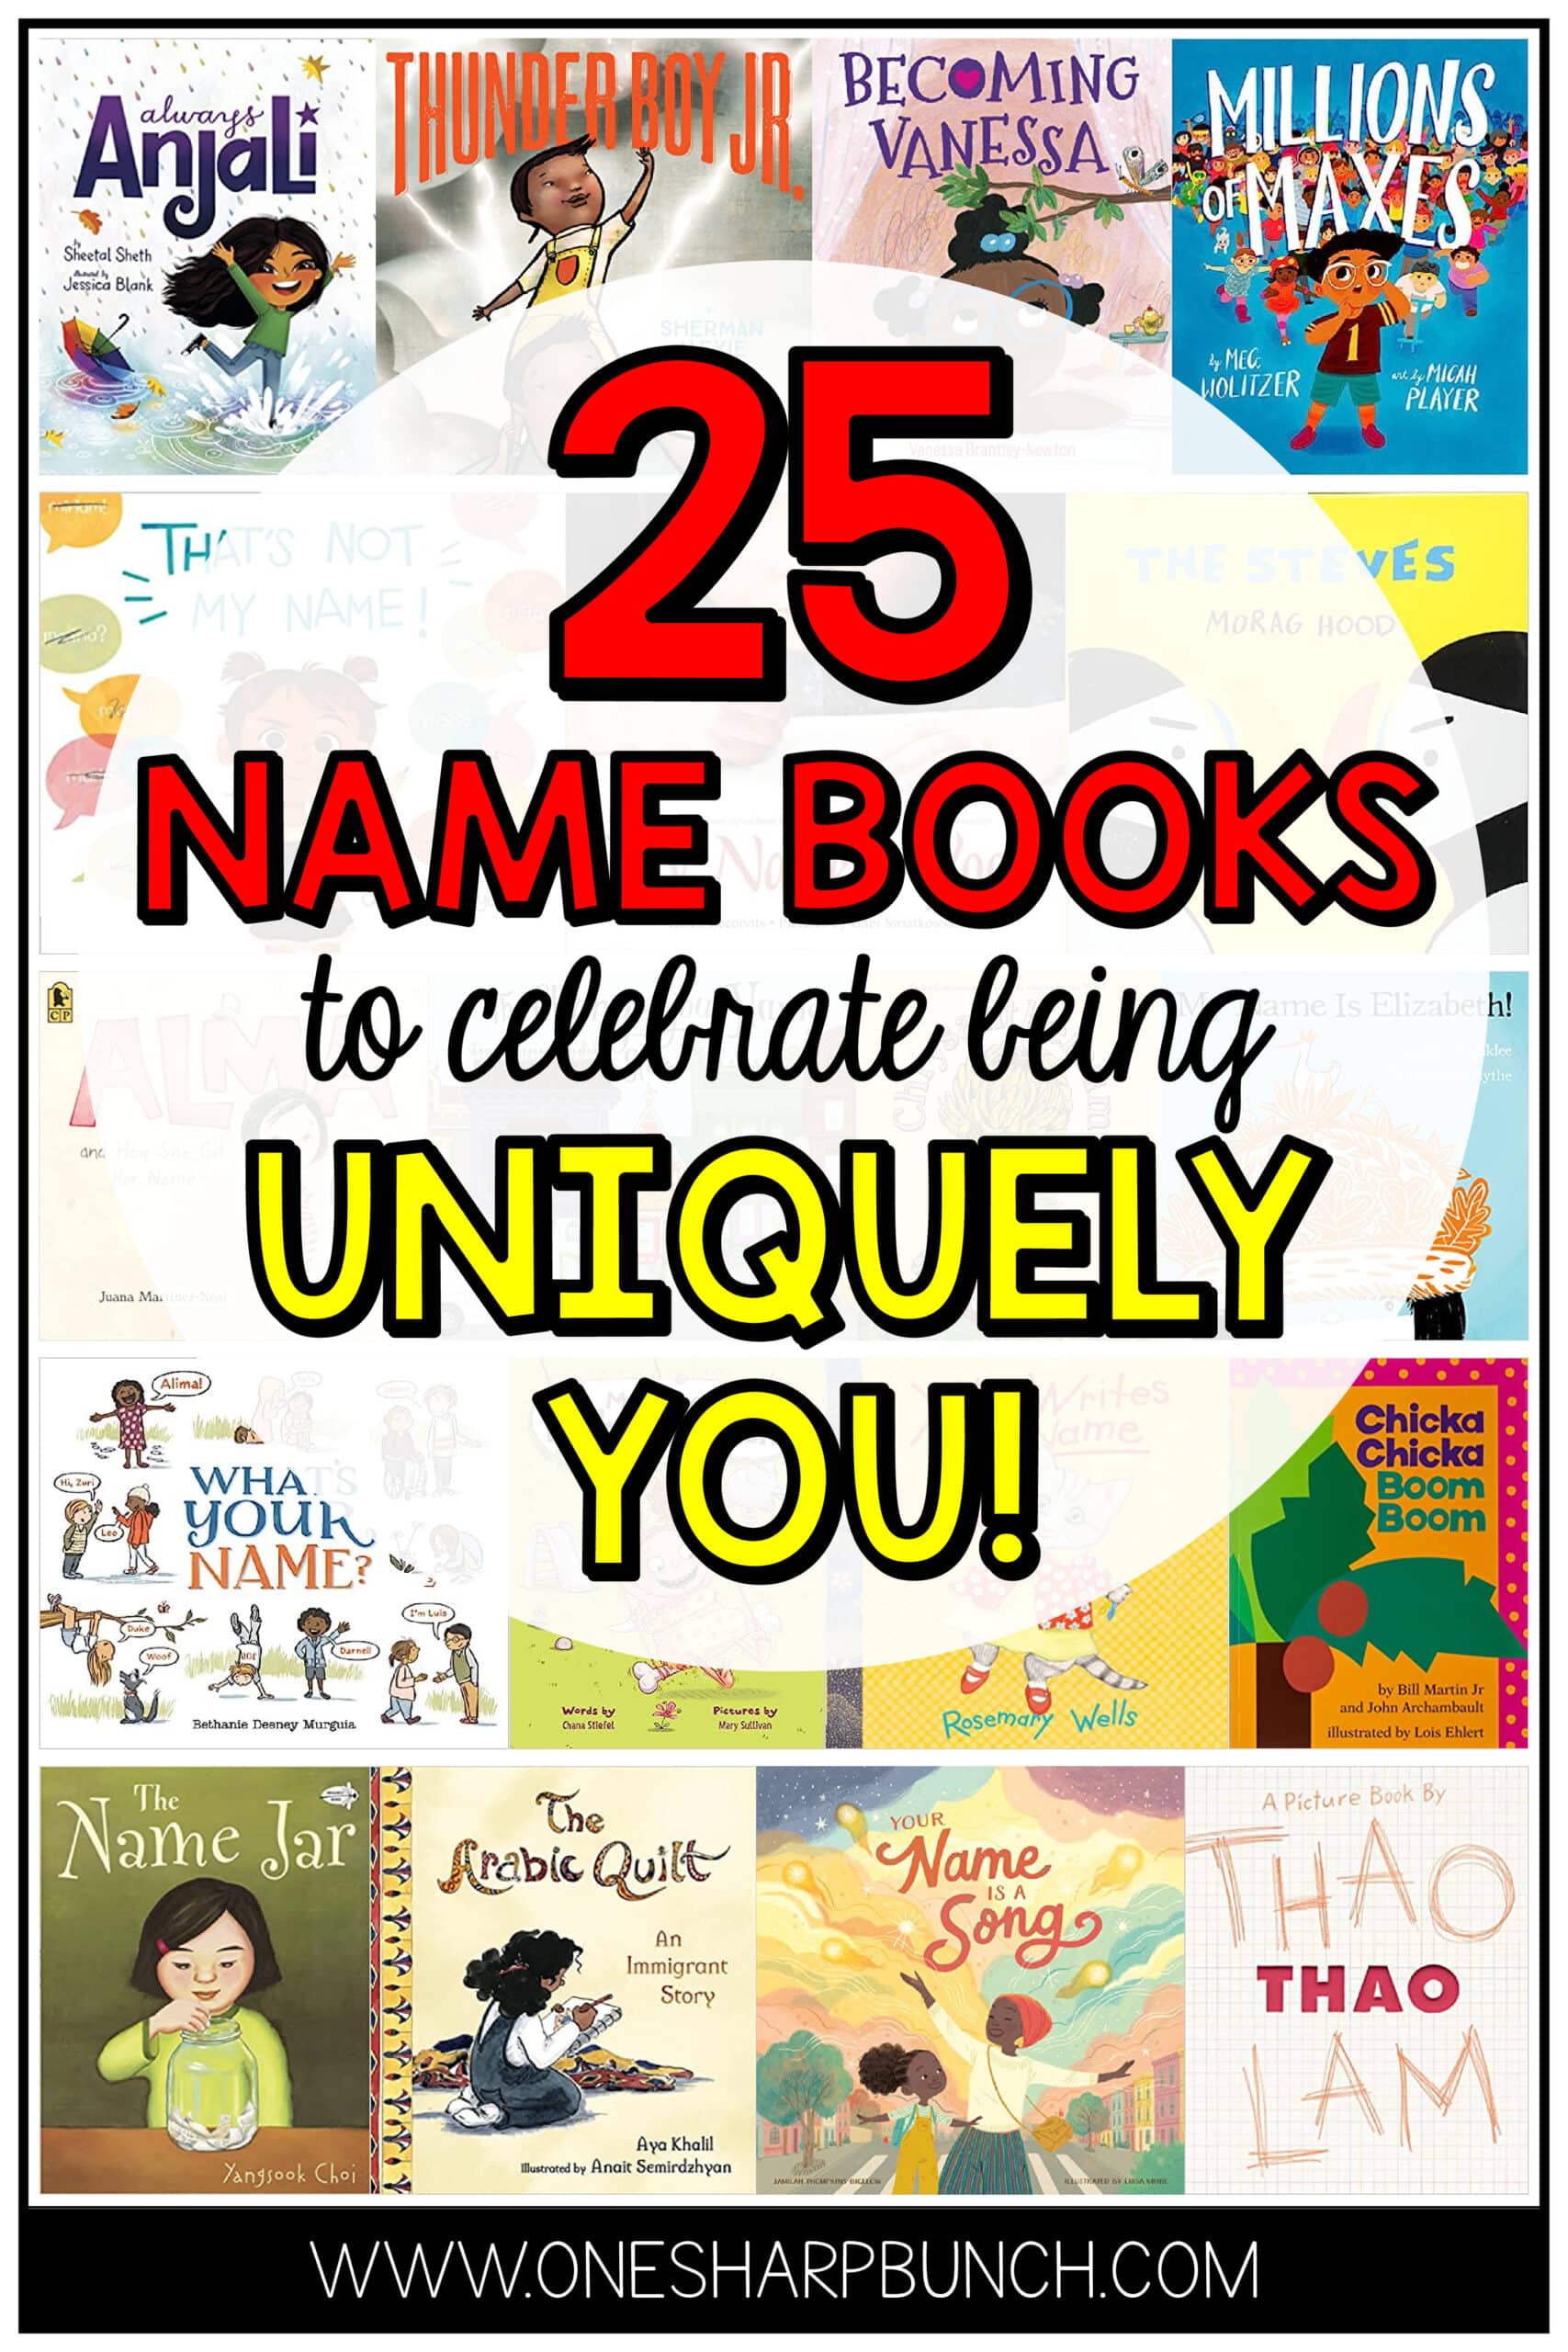 Looking for name books for back to school that you can incorporate into your first week lesson plans? To celebrate our uniqueness, I am sharing 25 name books for kids that are great for getting to know you activities and building classroom community in your early elementary classroom. Use these name books, including Chrysanthemum and The Name Jar, with a variety of name activities for preschool and kindergarten. Add these kids books to your beginning of the year lesson plans!